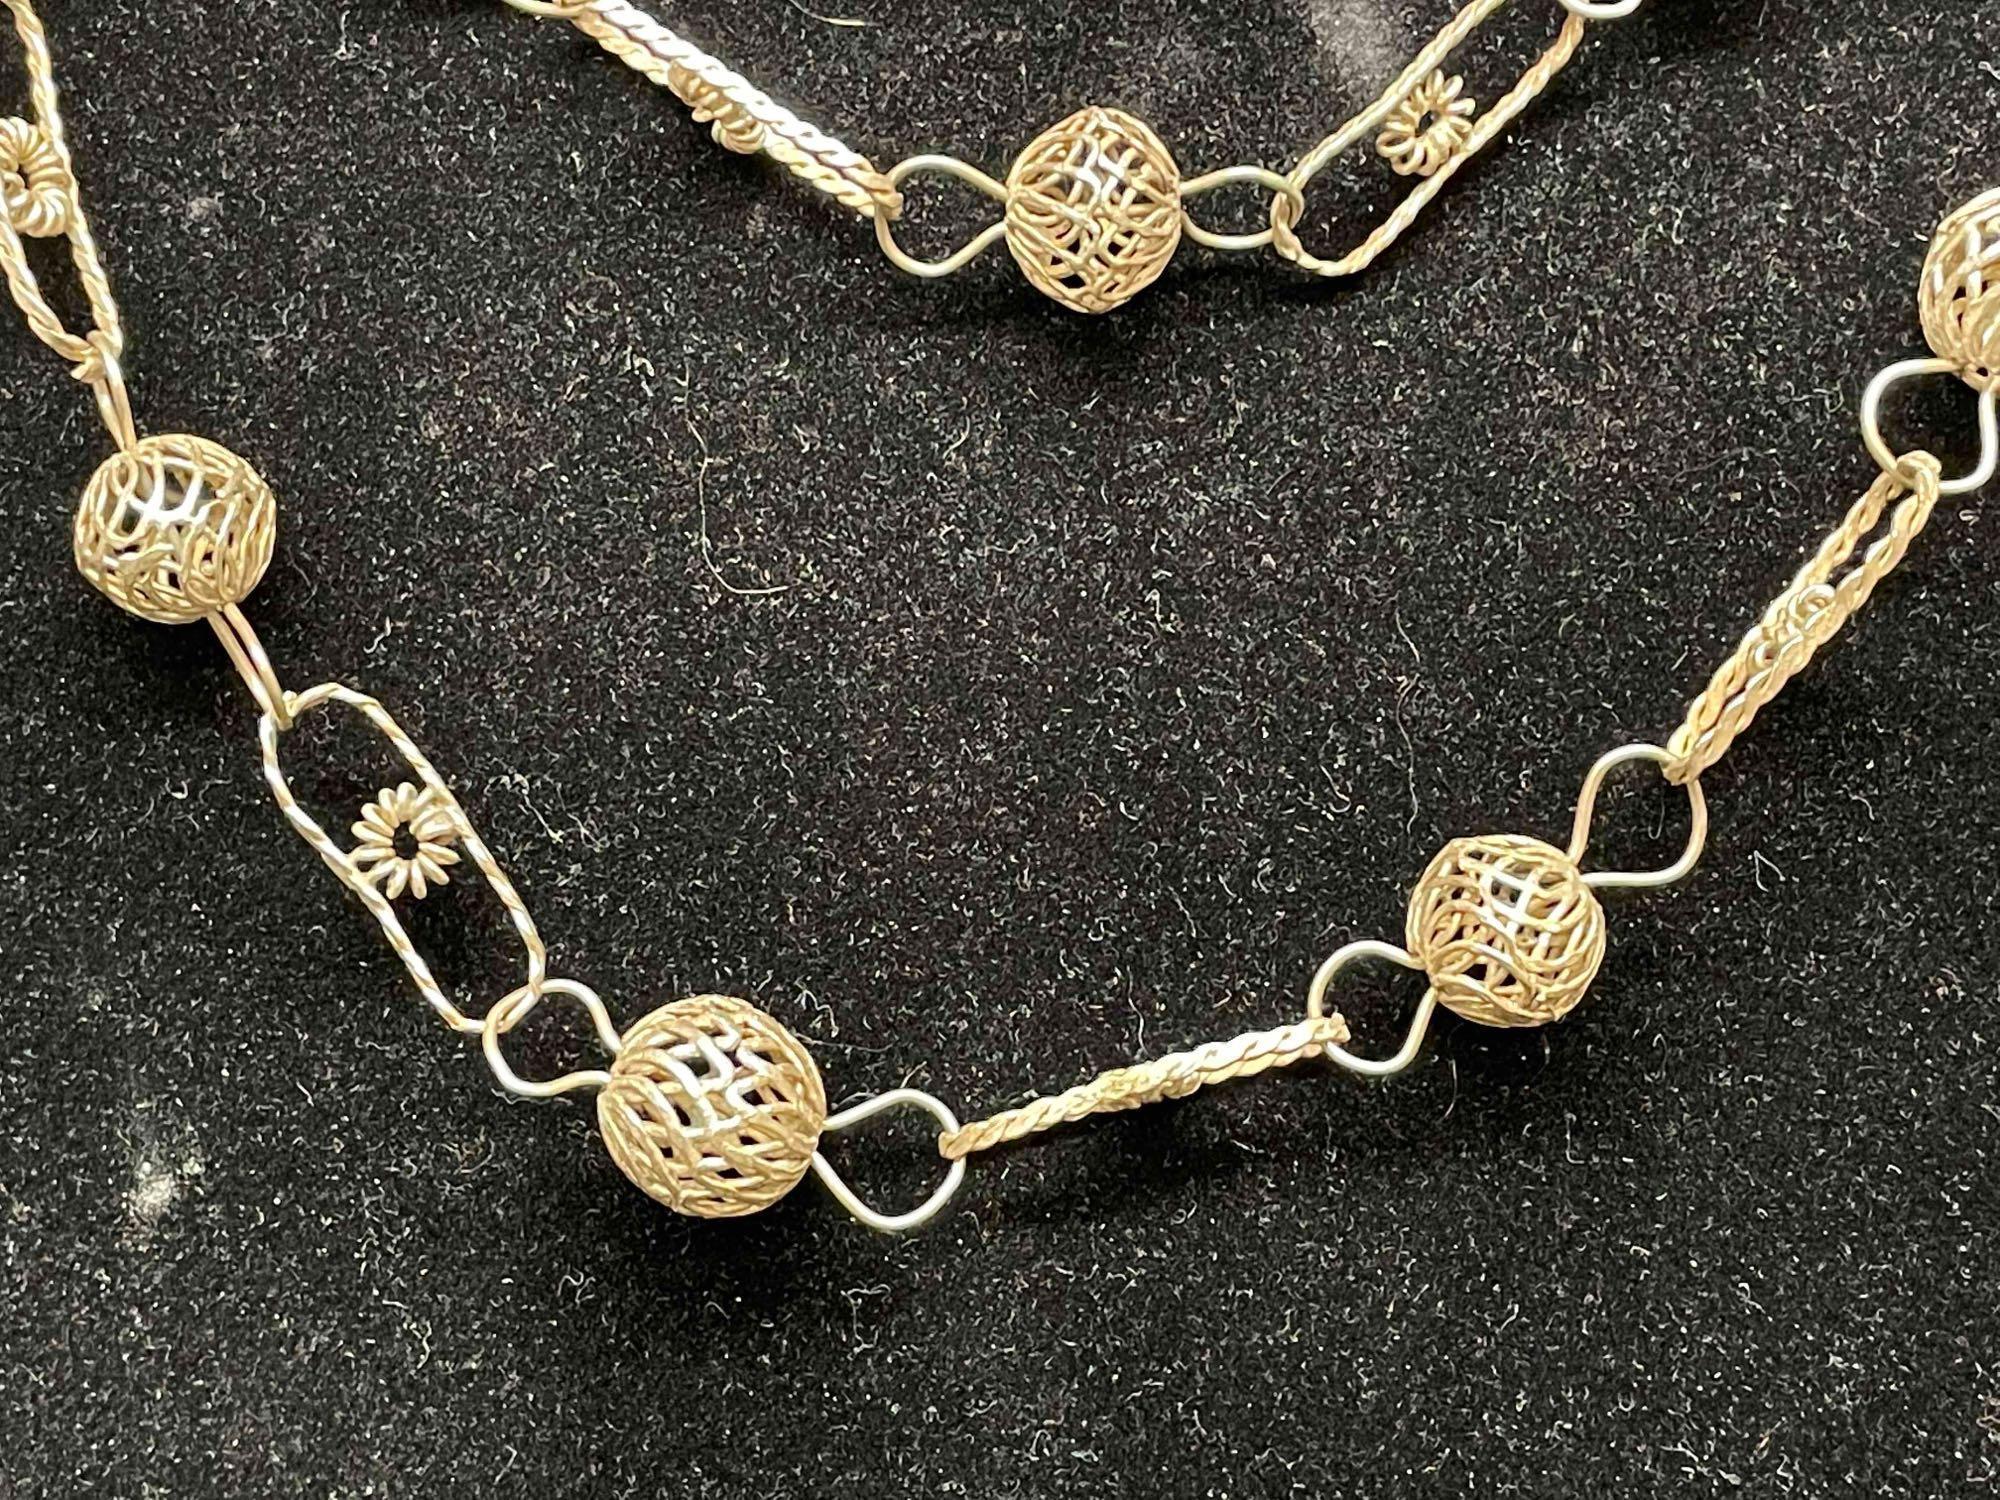 Unique Hand Made Necklace Possibly Appers to be Sterling